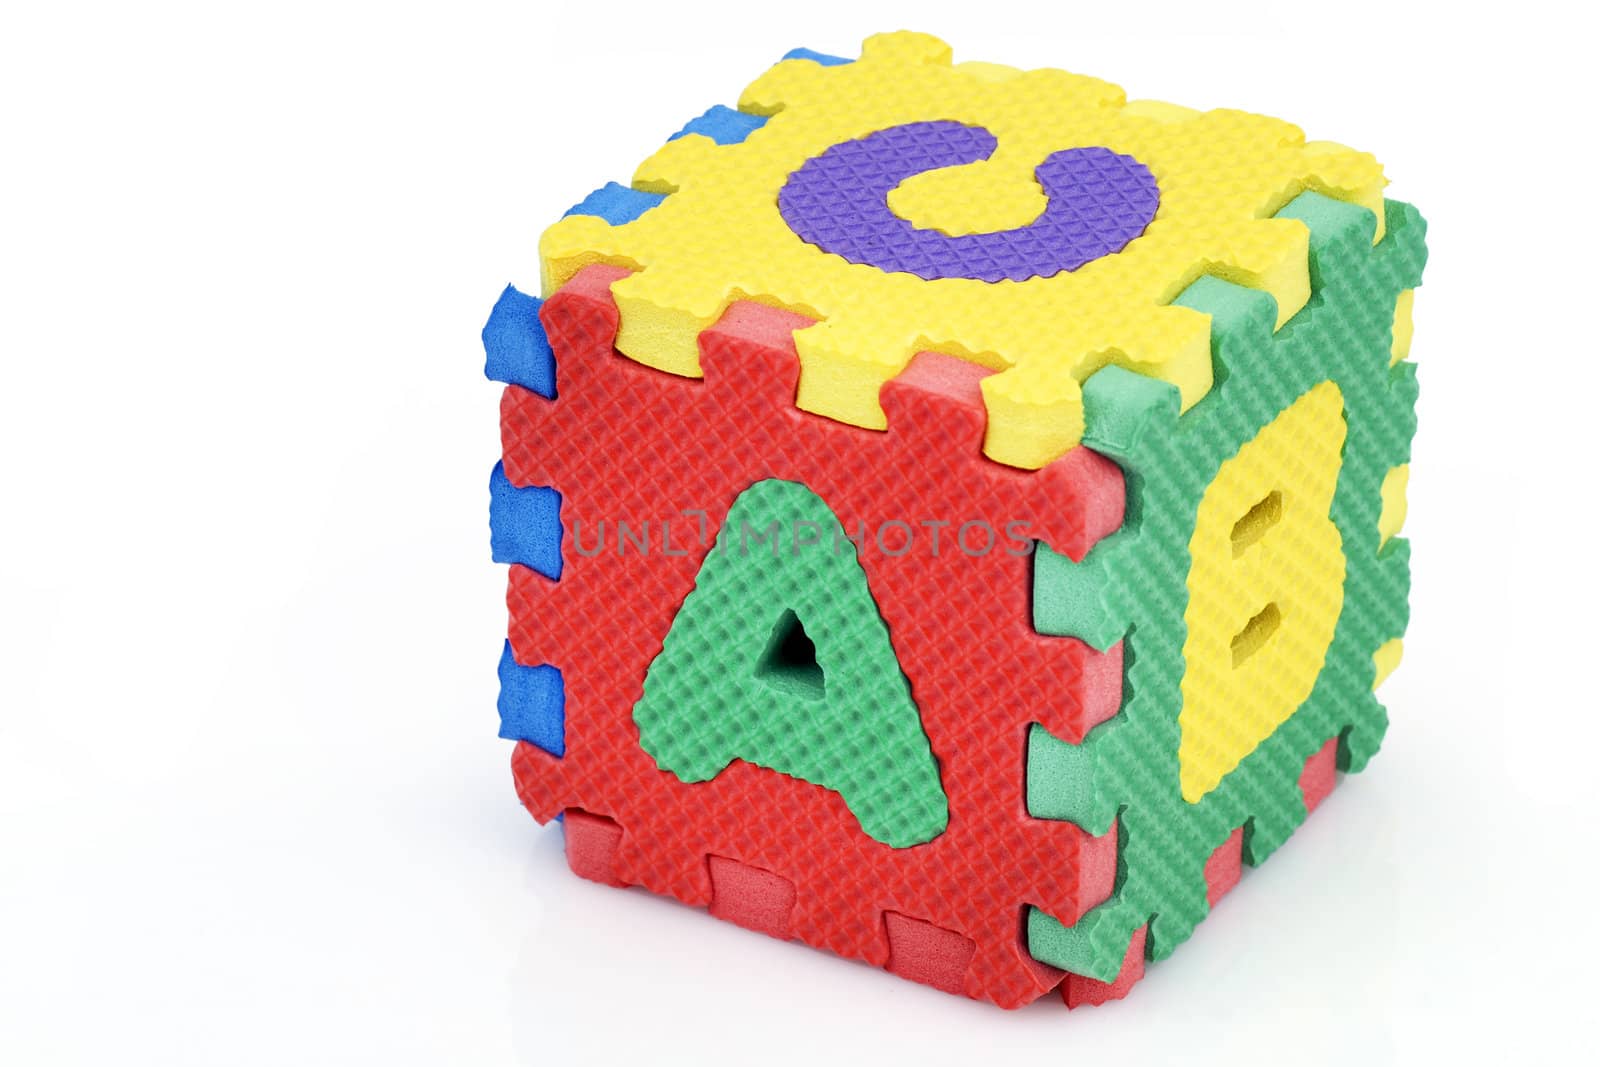 Fun colorful toy puzzle cube or dice in textured foam for kids to learn their alphabet, here a, b, c.